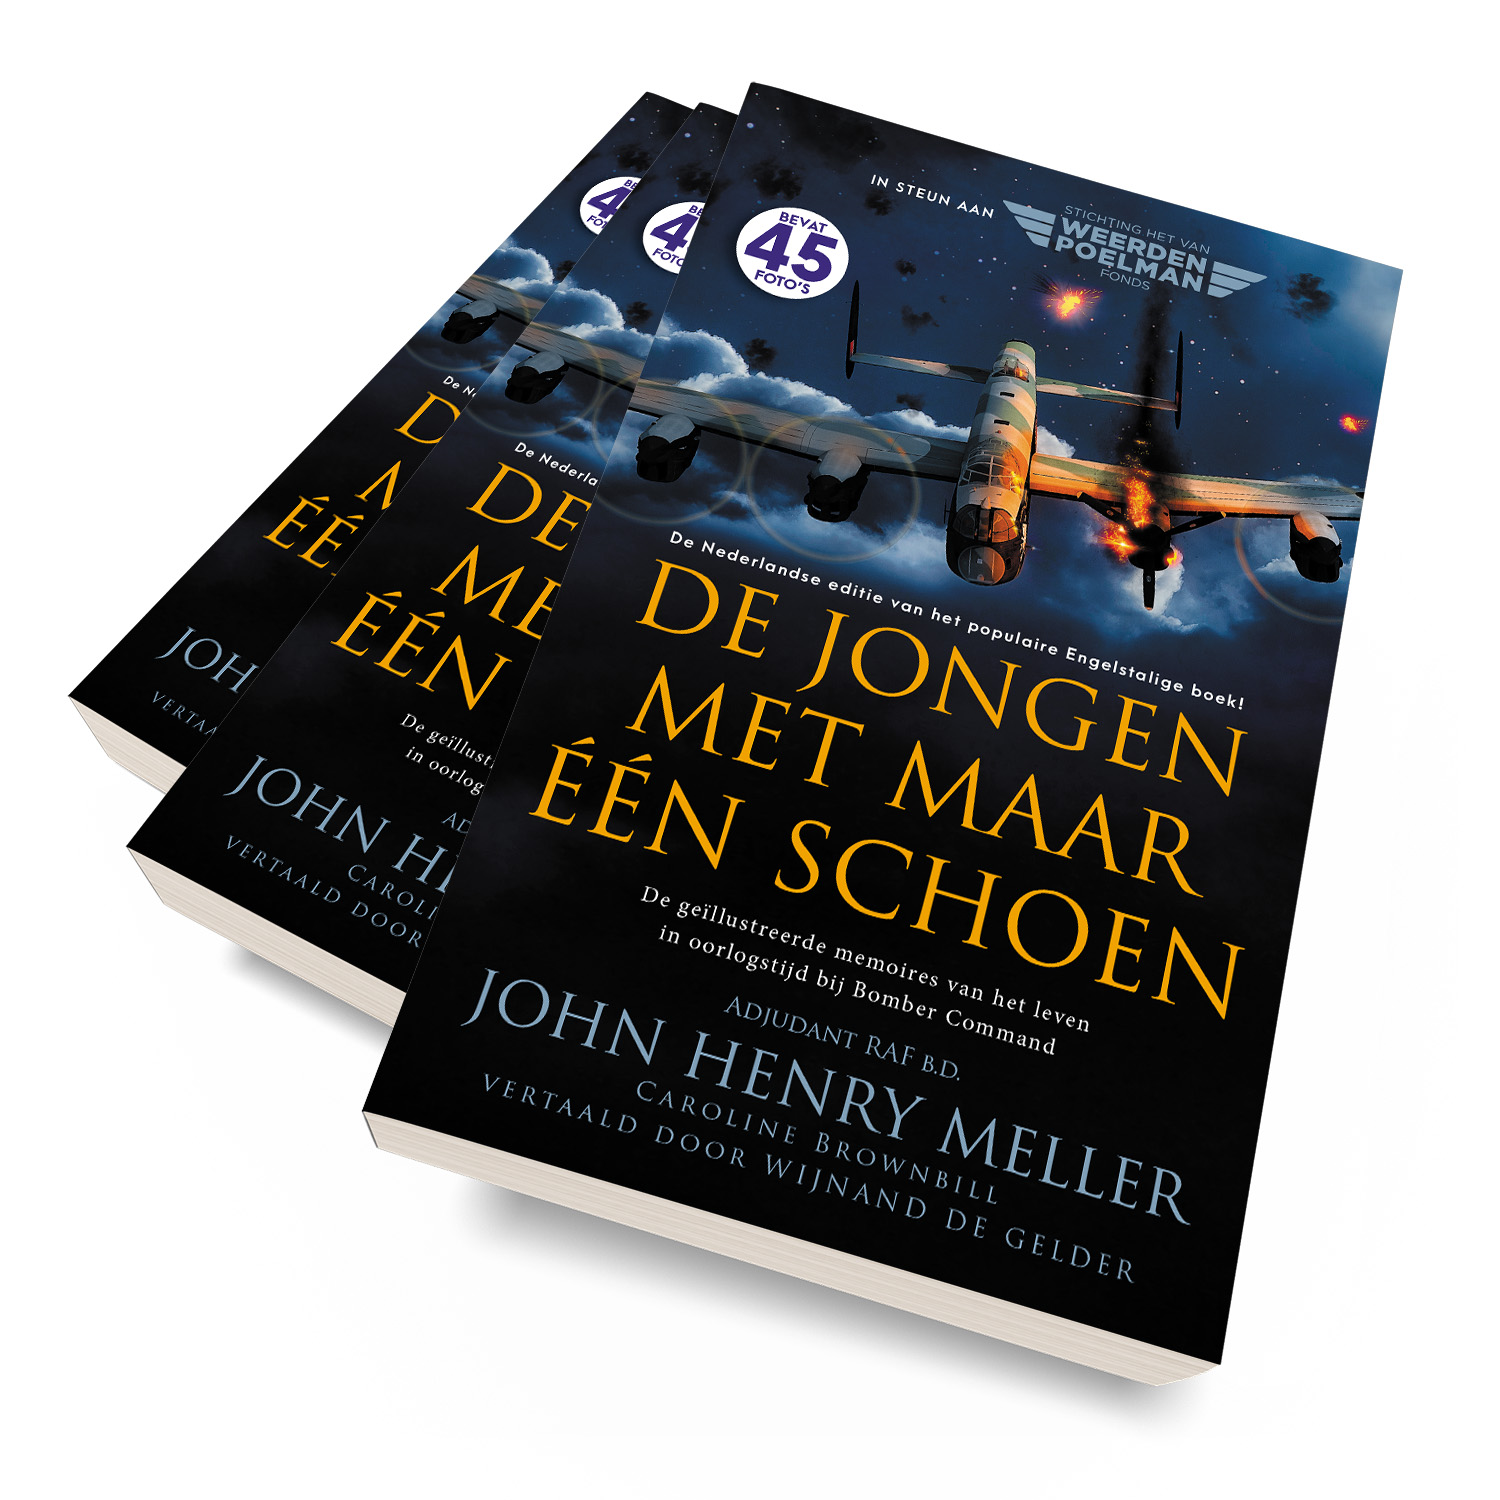 'De Jongen Met Maar Één Schoen' is the Dutch-translated version of a vivid and affecting memoir of life in RAF Bomber Command during WW2. The authors are John Henry Meller and Caroline Brownbill. The translator is Wijnand De Gelder. The book cover design and interior formatting are by Mark Thomas. To learn more about what Mark could do for your book, please visit coverness.com.